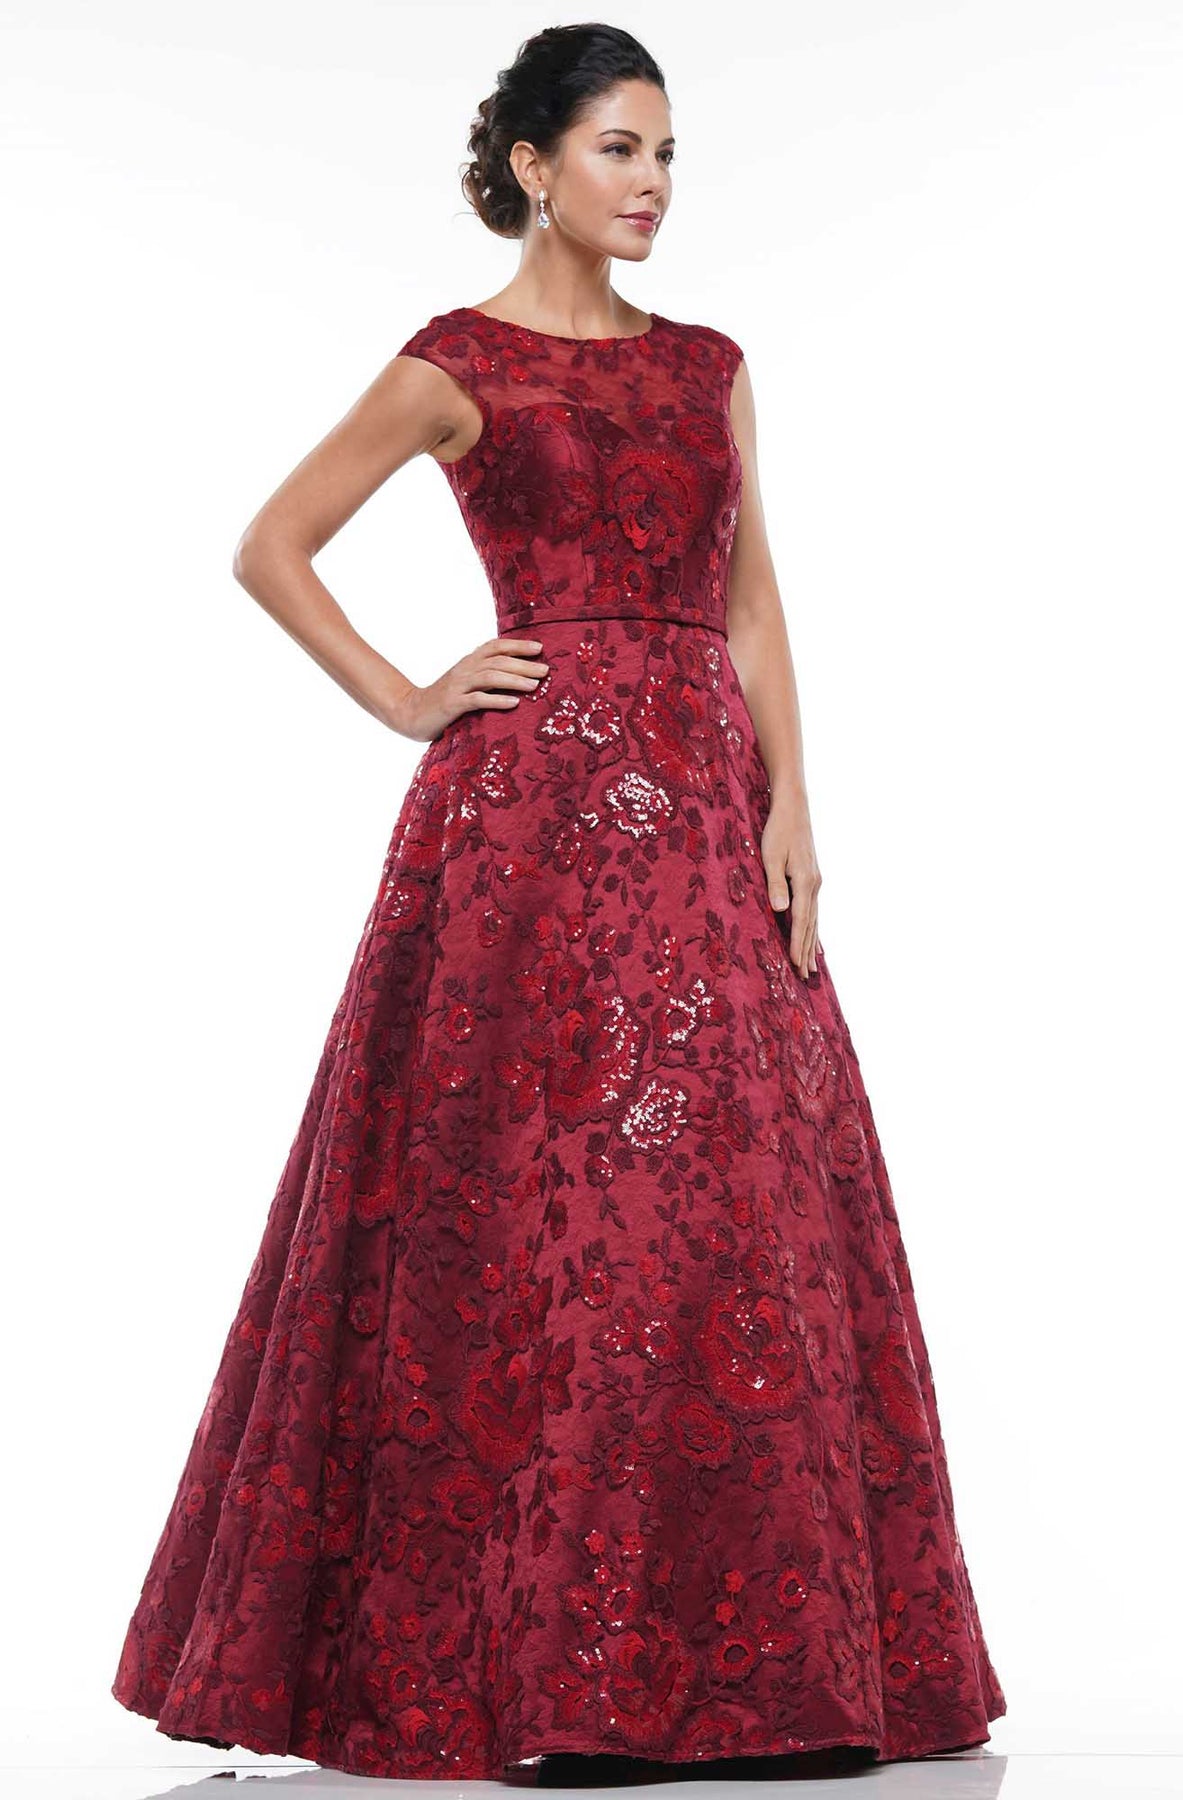 Marsoni By Colors - MV1012 Sequined Rosette Embroidered Long Gown Mother of the Bride Dresses 4 / Wine